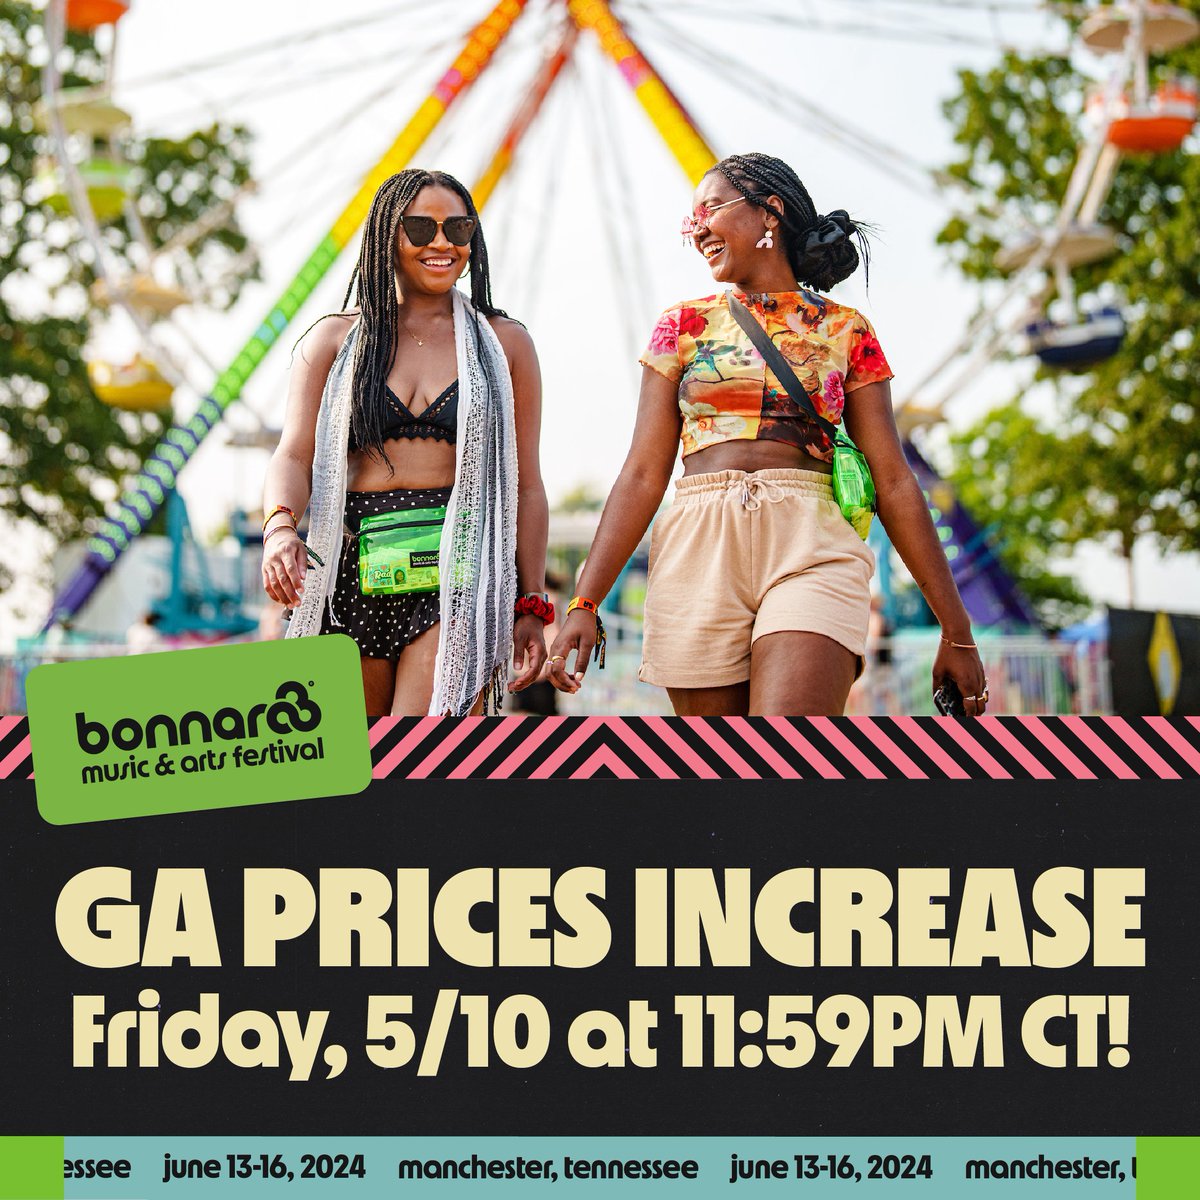 we're closing in on roooo! be sure to snag your tix to the farm before friday night if ya haven't yet 👀 bonnaroo.com/tickets